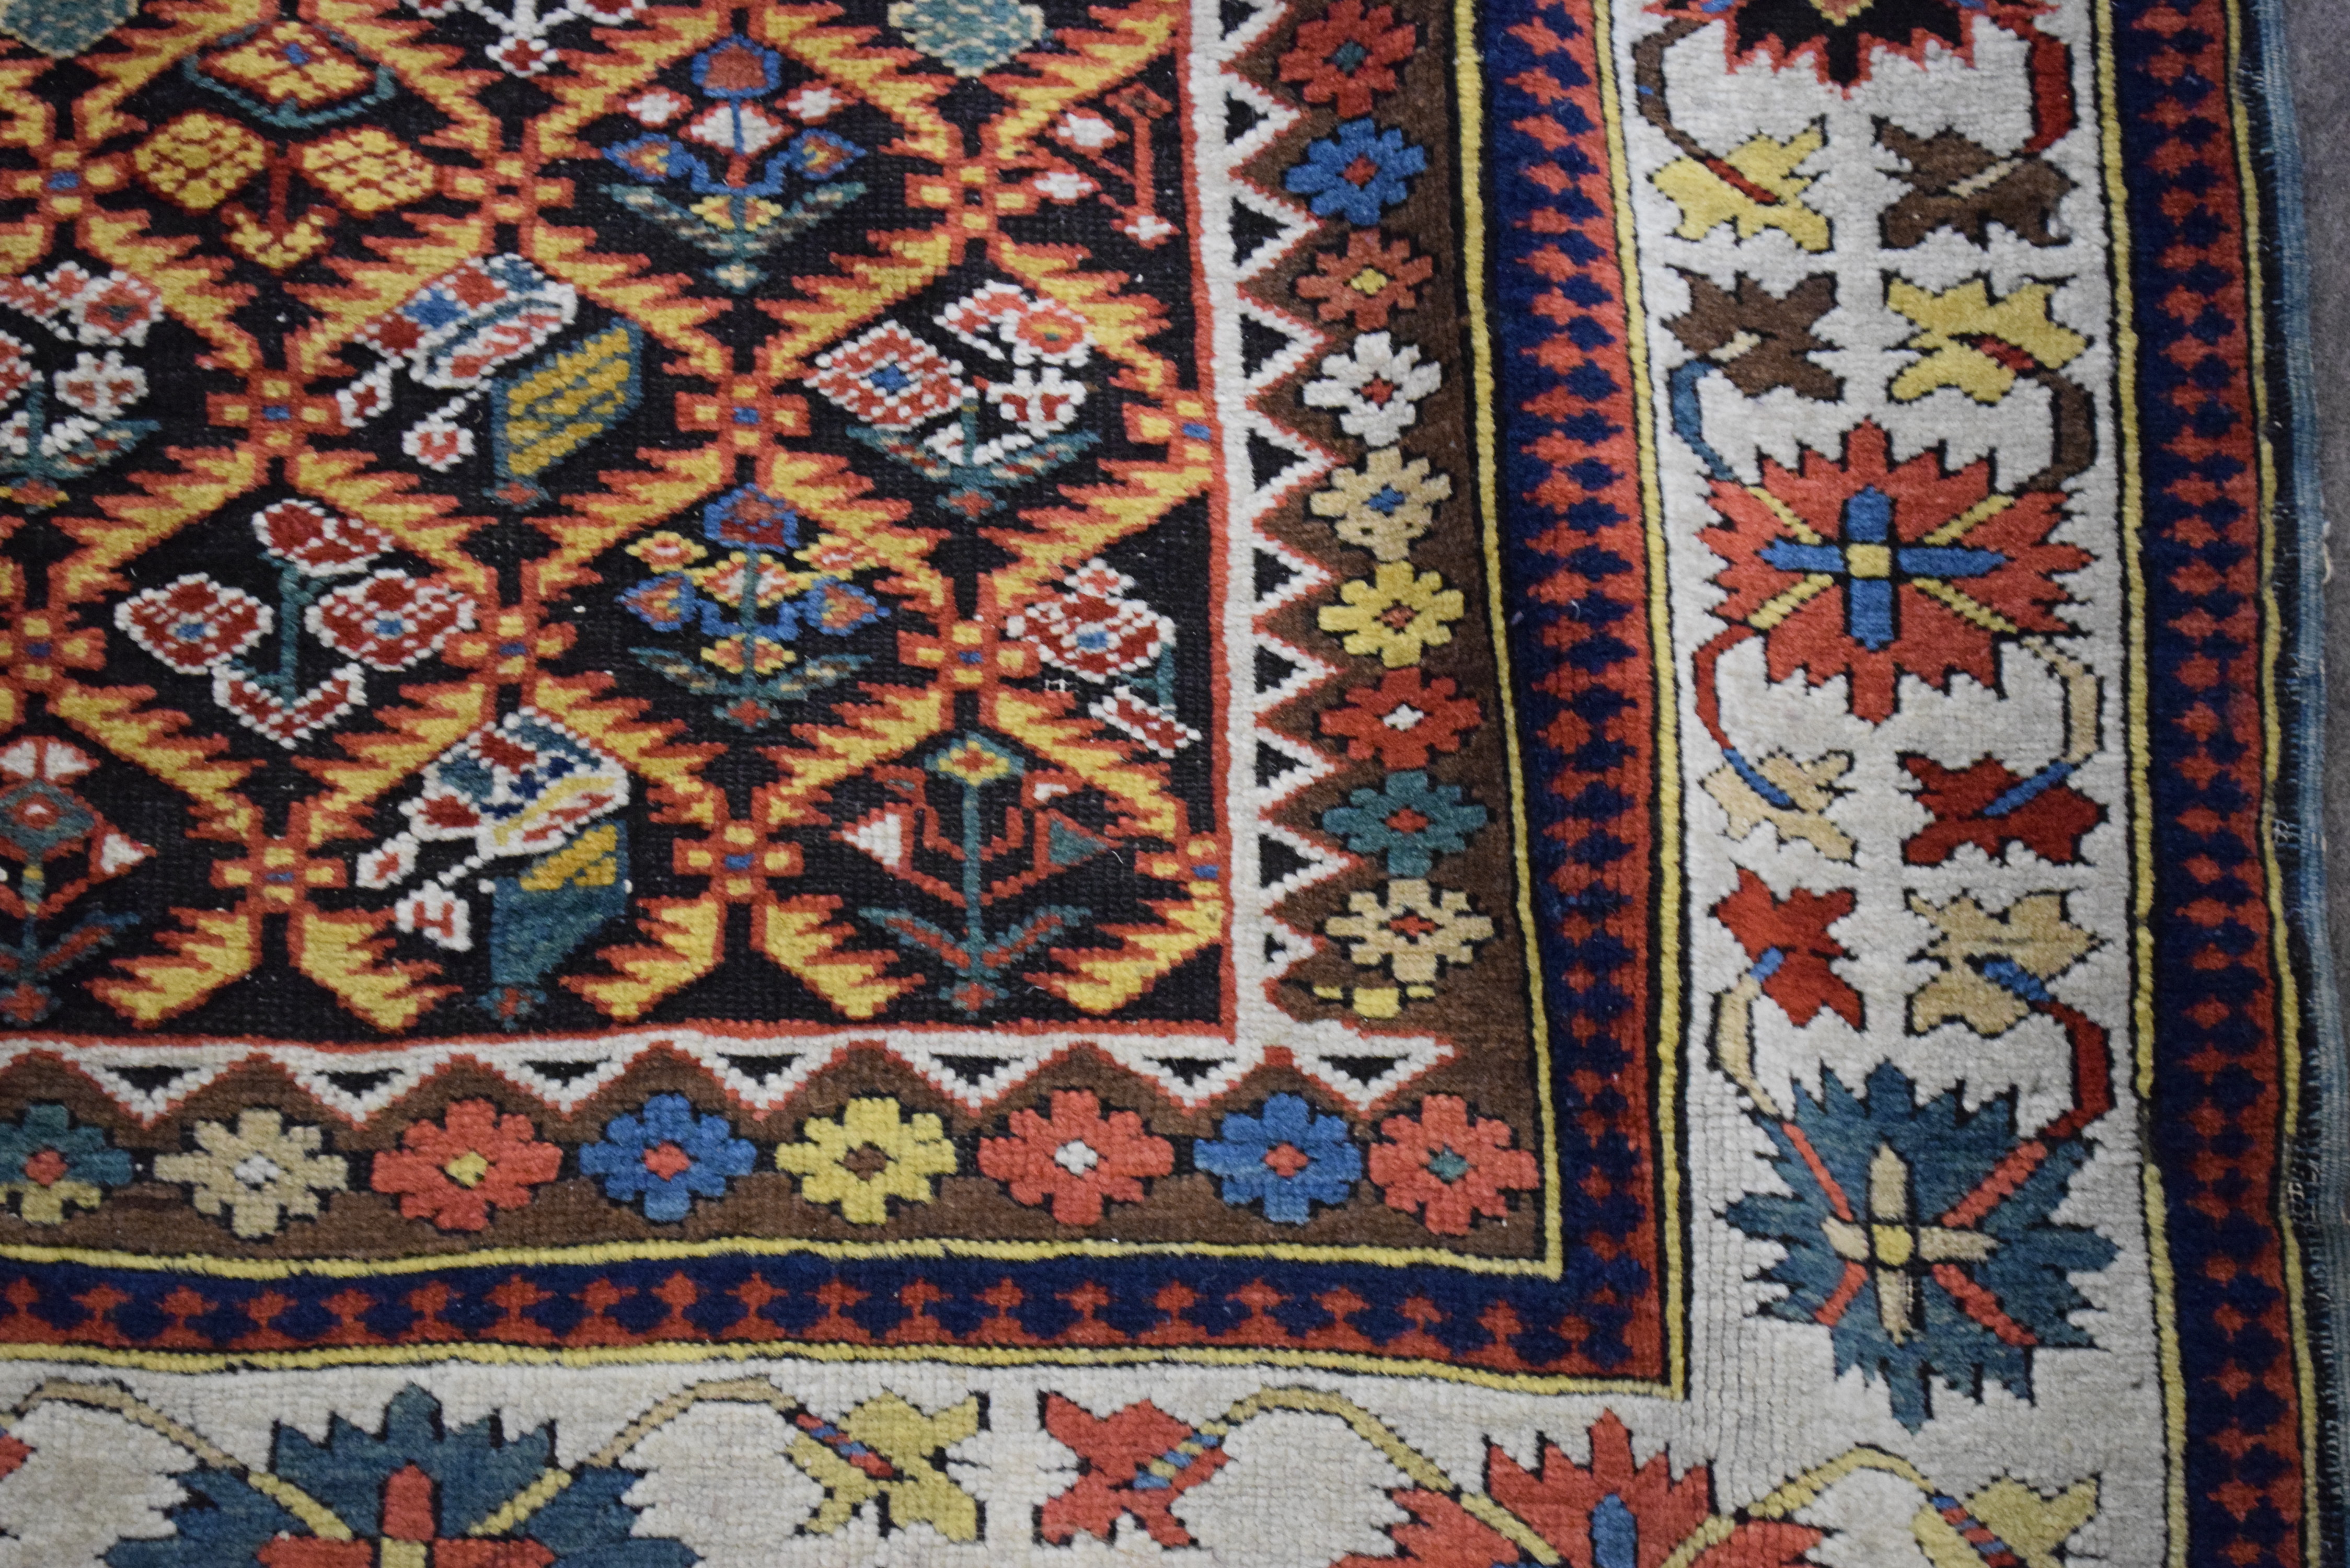 Antique Uzbek runner carpet decorated with large central panel, with stylised foliage detail - Image 6 of 6